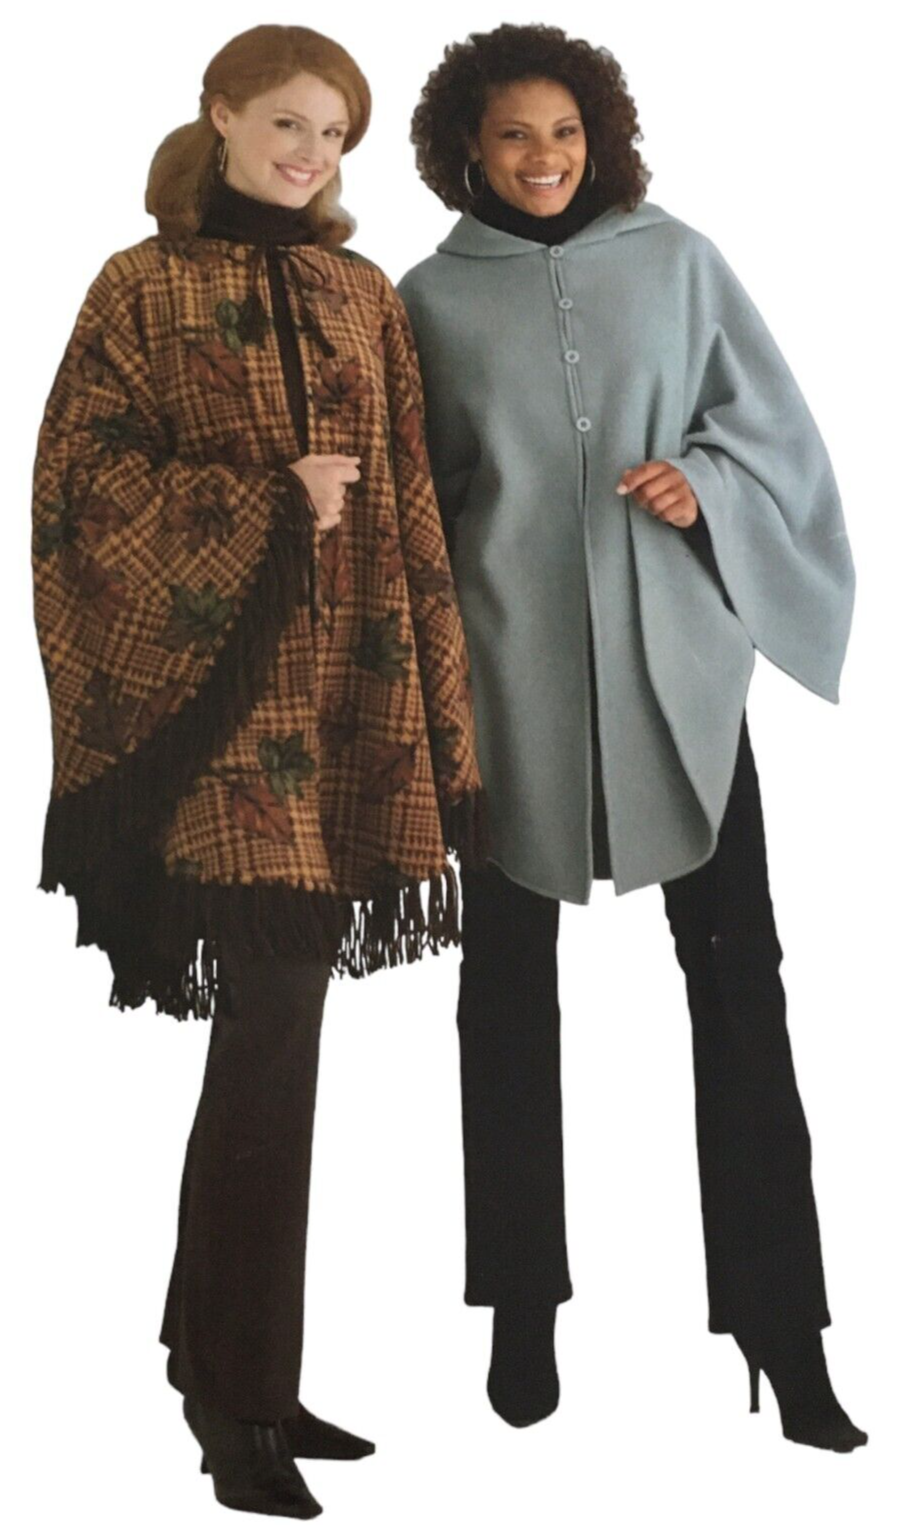 Butterick Sewing Pattern B4266 Poncho Top Warm Winter Size L XL Very Easy Uncut - $5.99